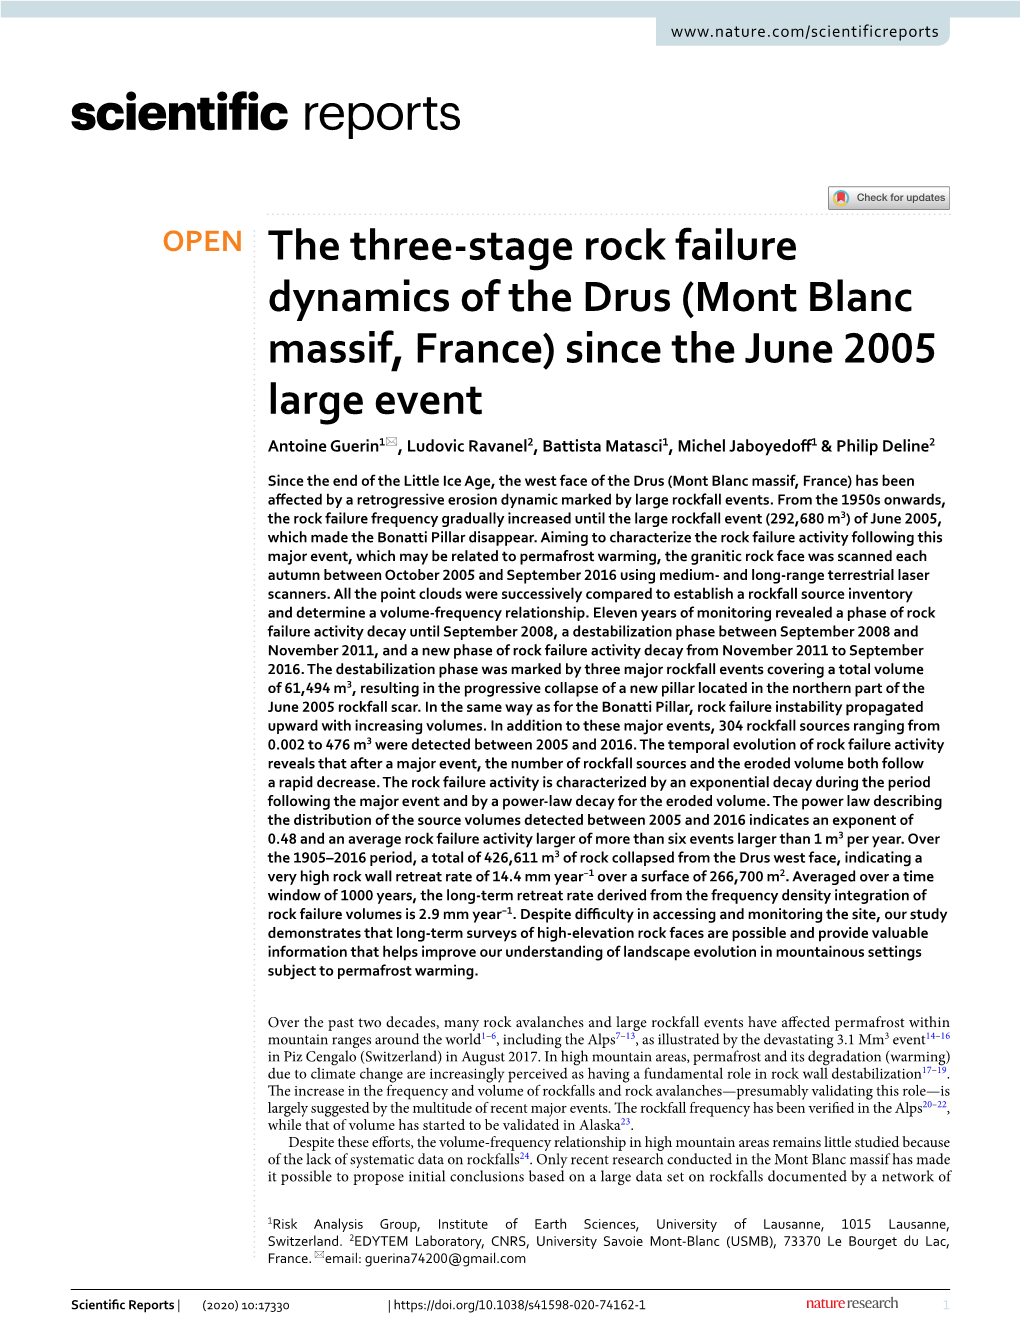 The Three-Stage Rock Failure Dynamics of the Drus (Mont Blanc